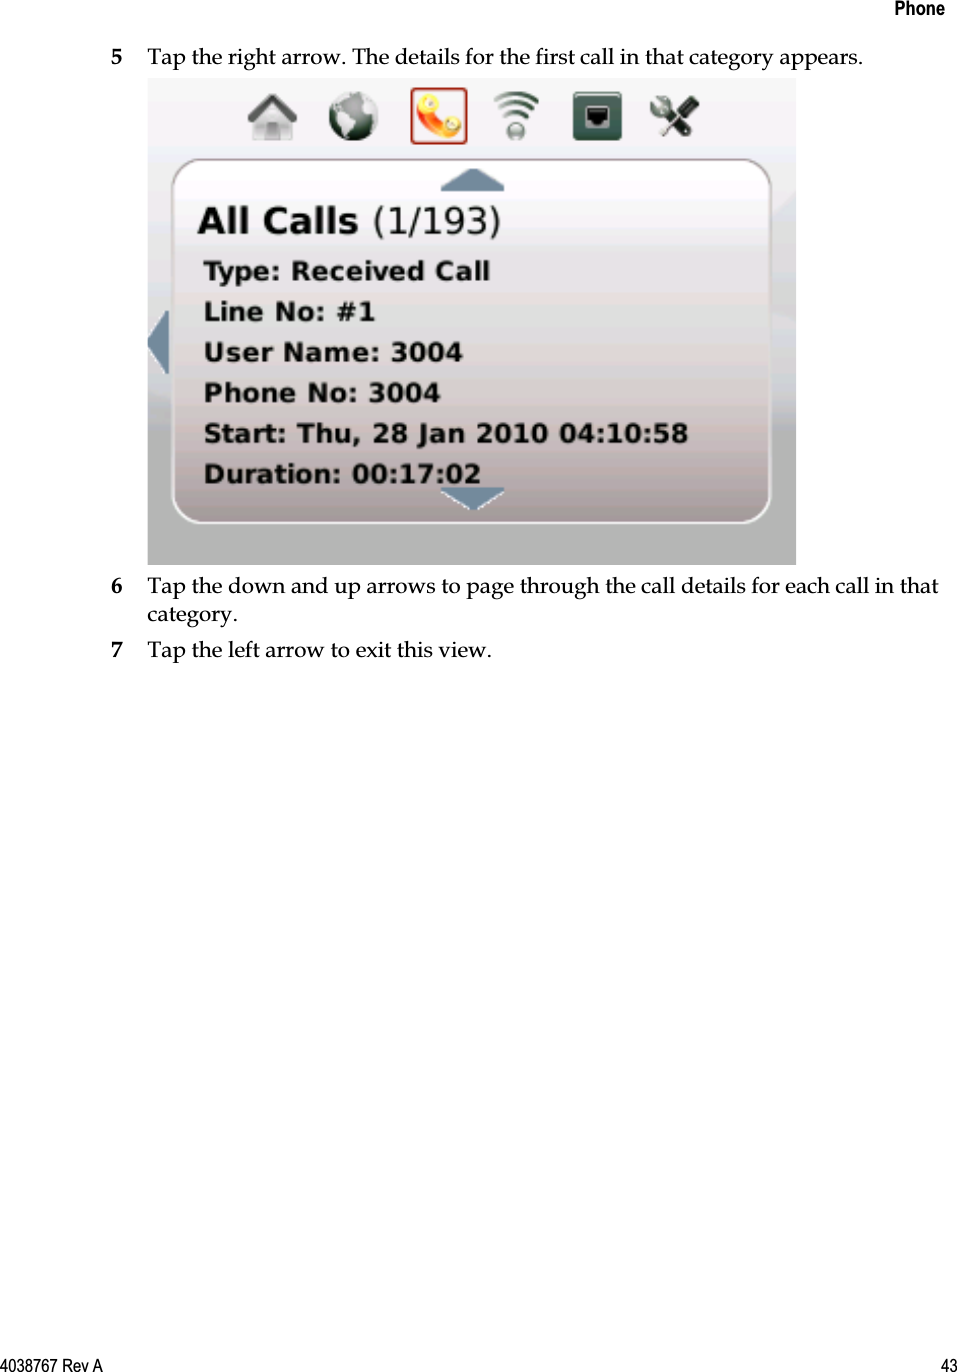    Phone  4038767 Rev A  43  5 Tap the right arrow. The details for the first call in that category appears.  6 Tap the down and up arrows to page through the call details for each call in that category. 7 Tap the left arrow to exit this view.  